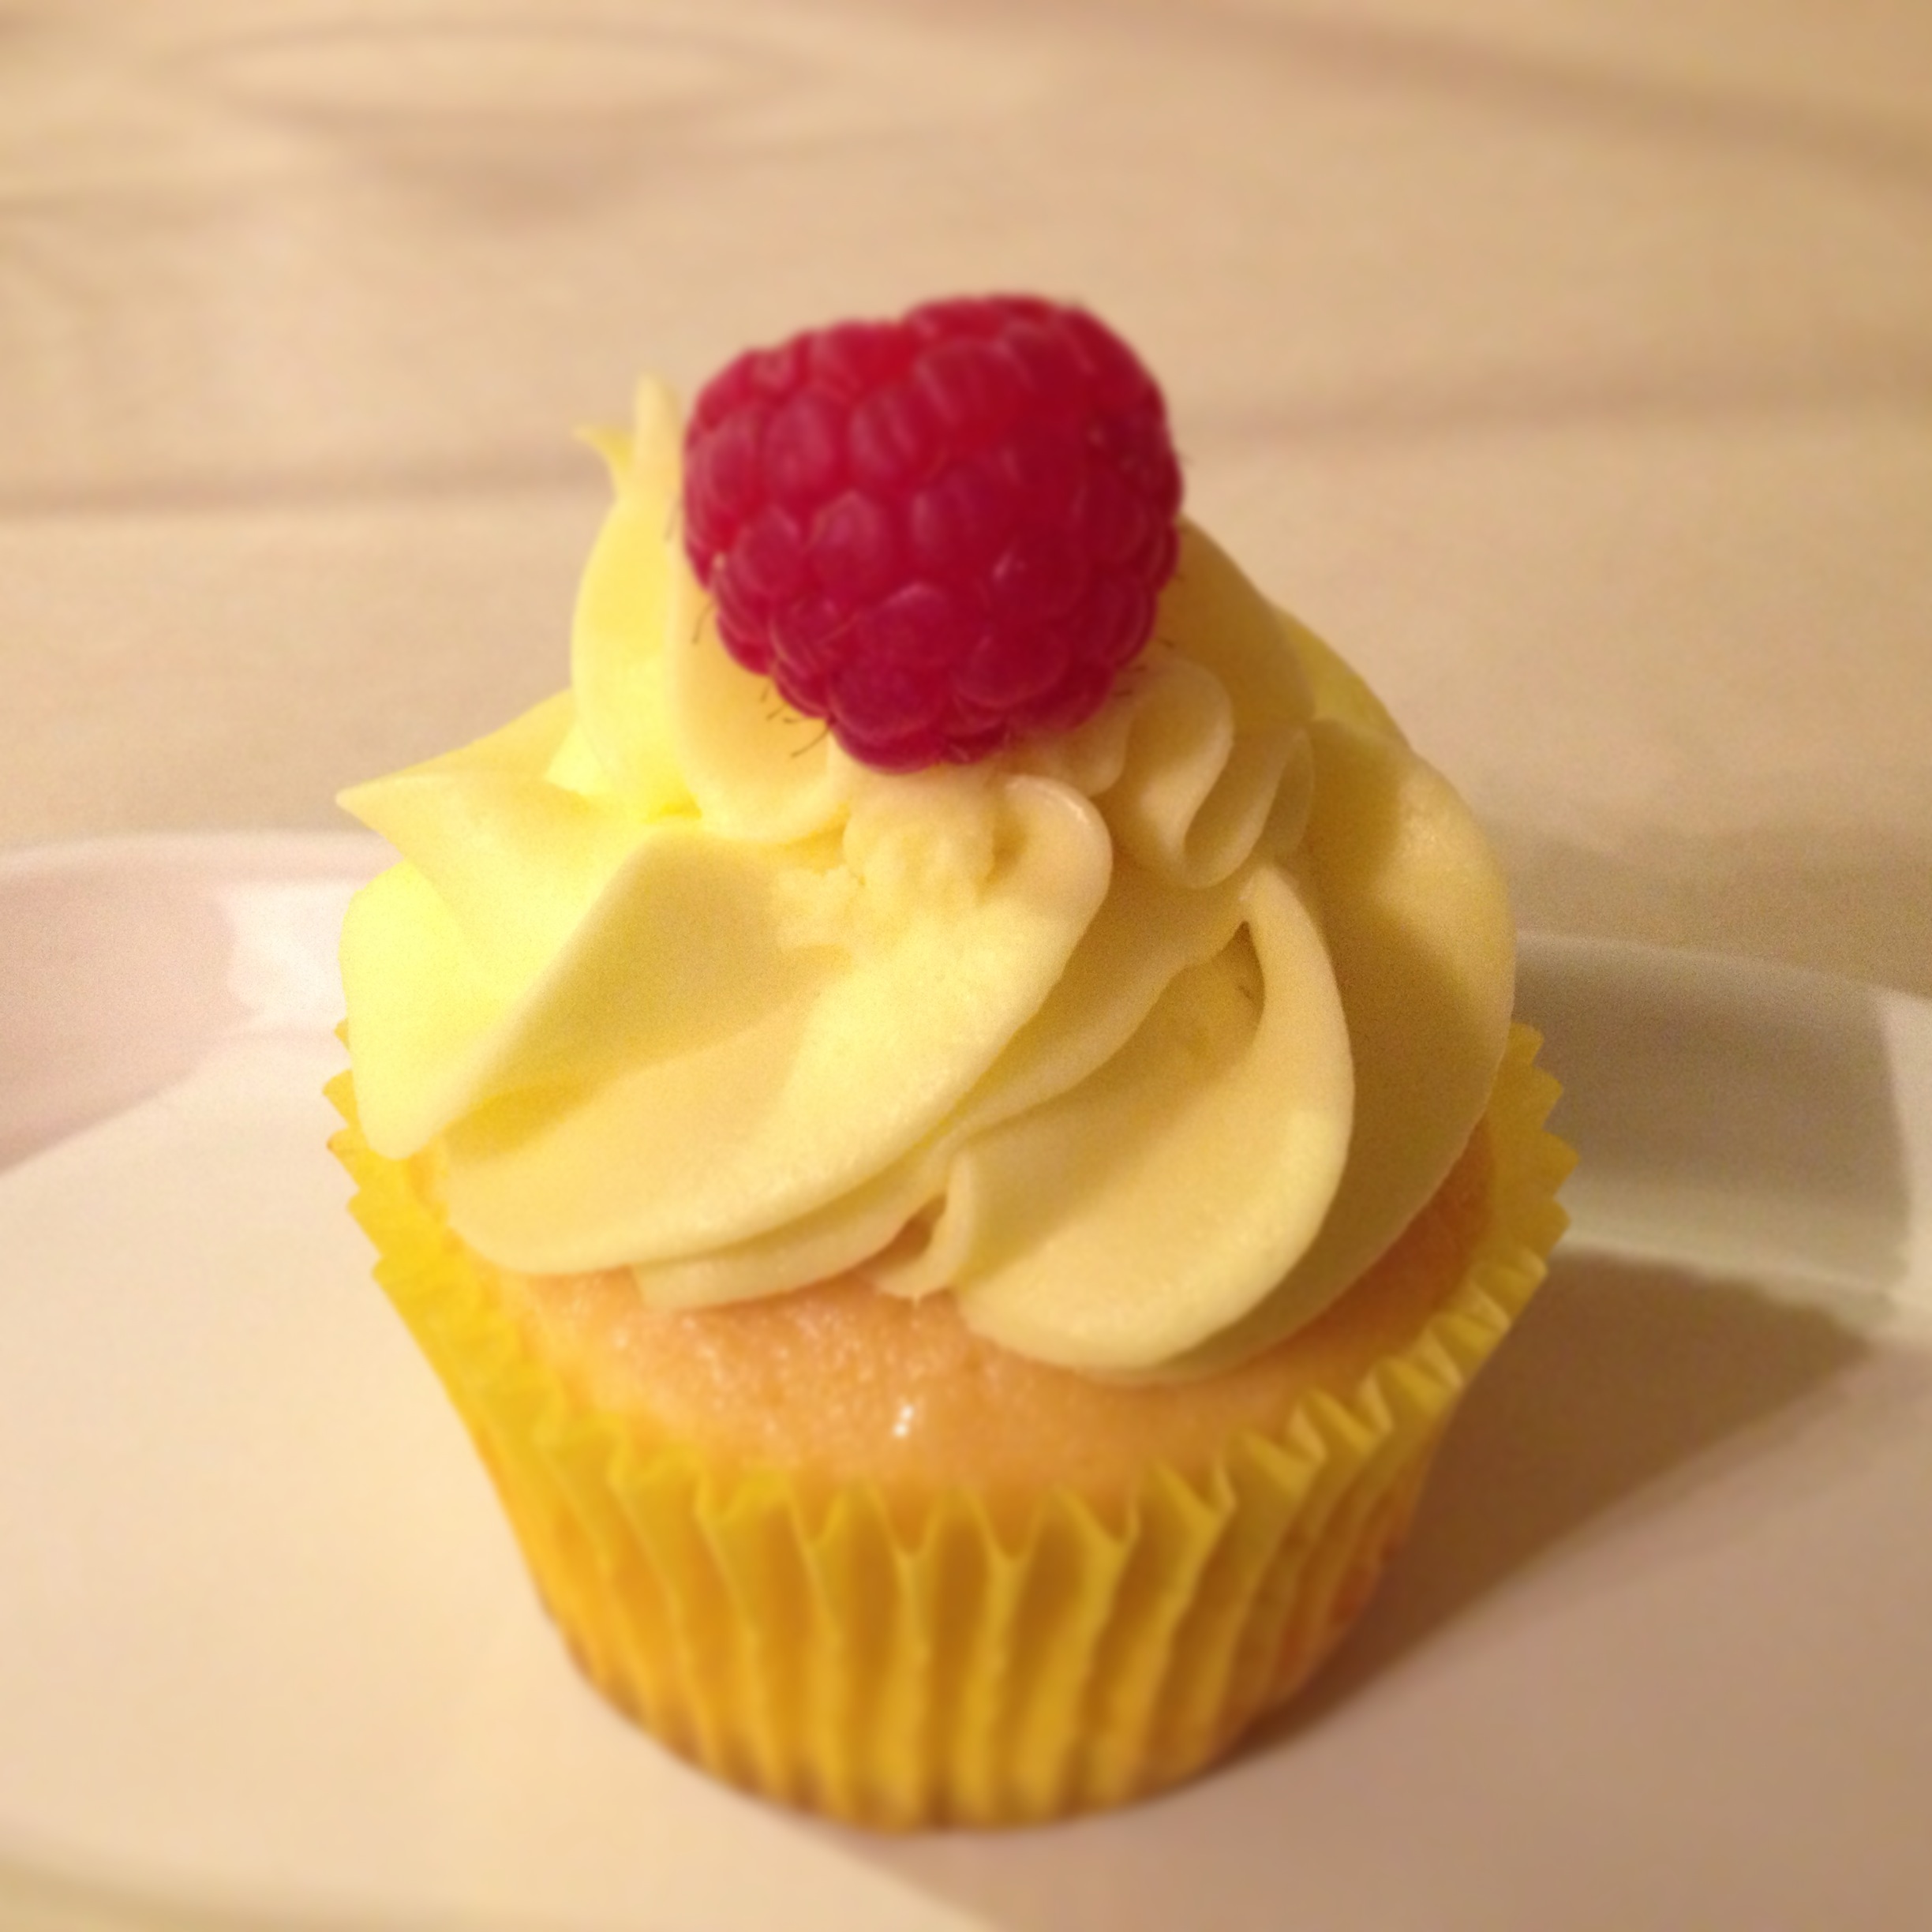 photo of a raspberry lemonade cupcake from cocos confections